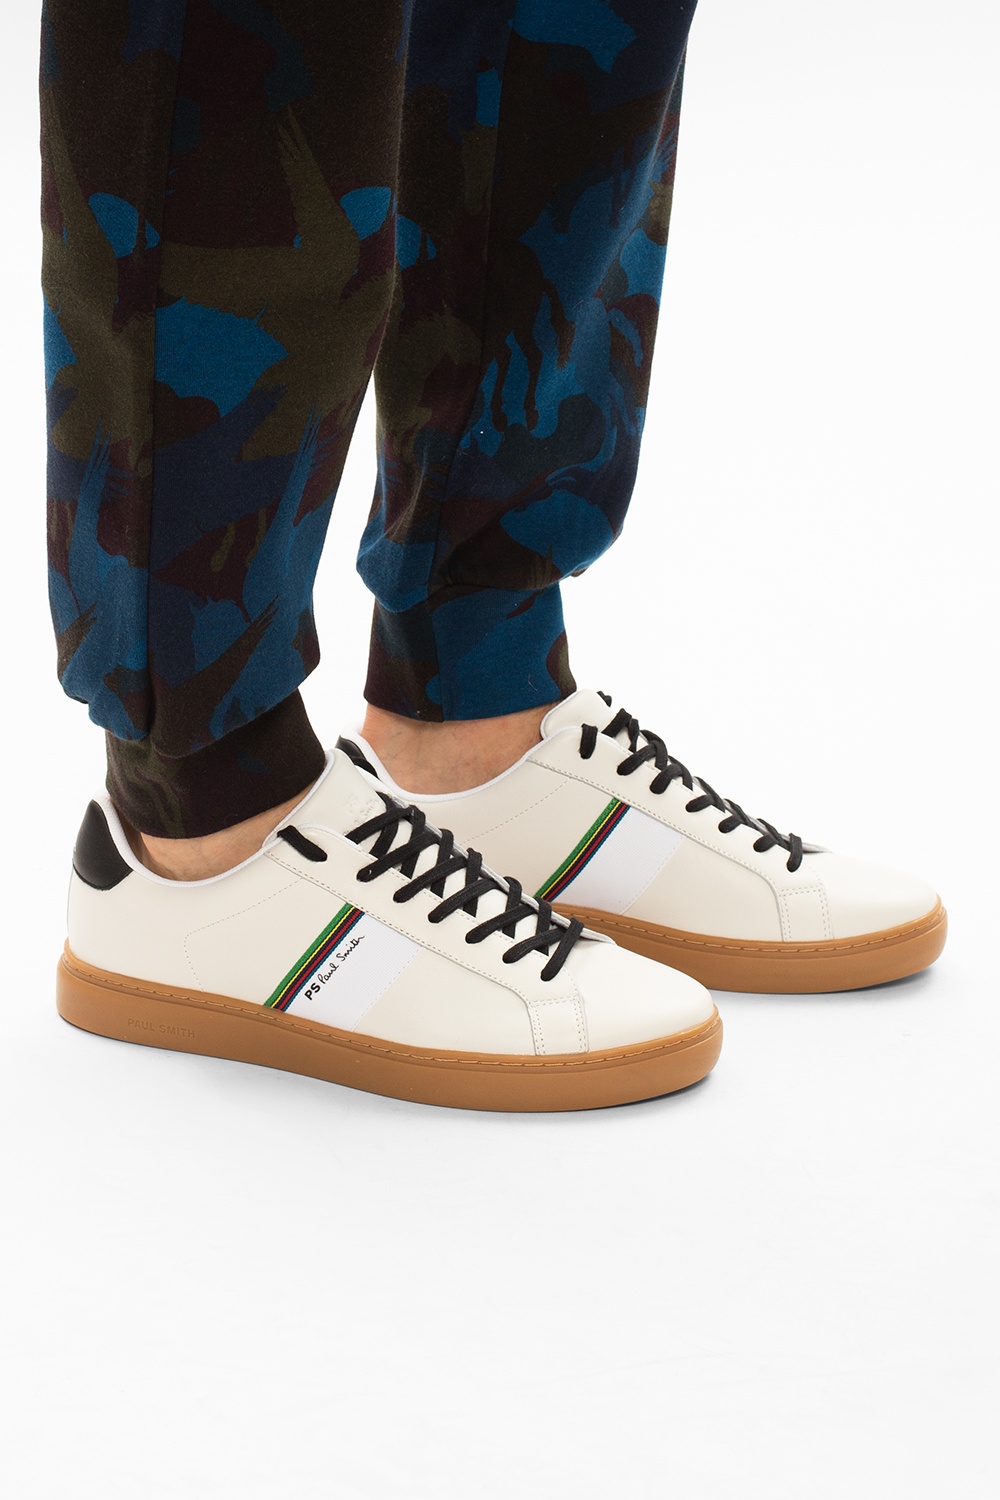 paul smith rex trainers